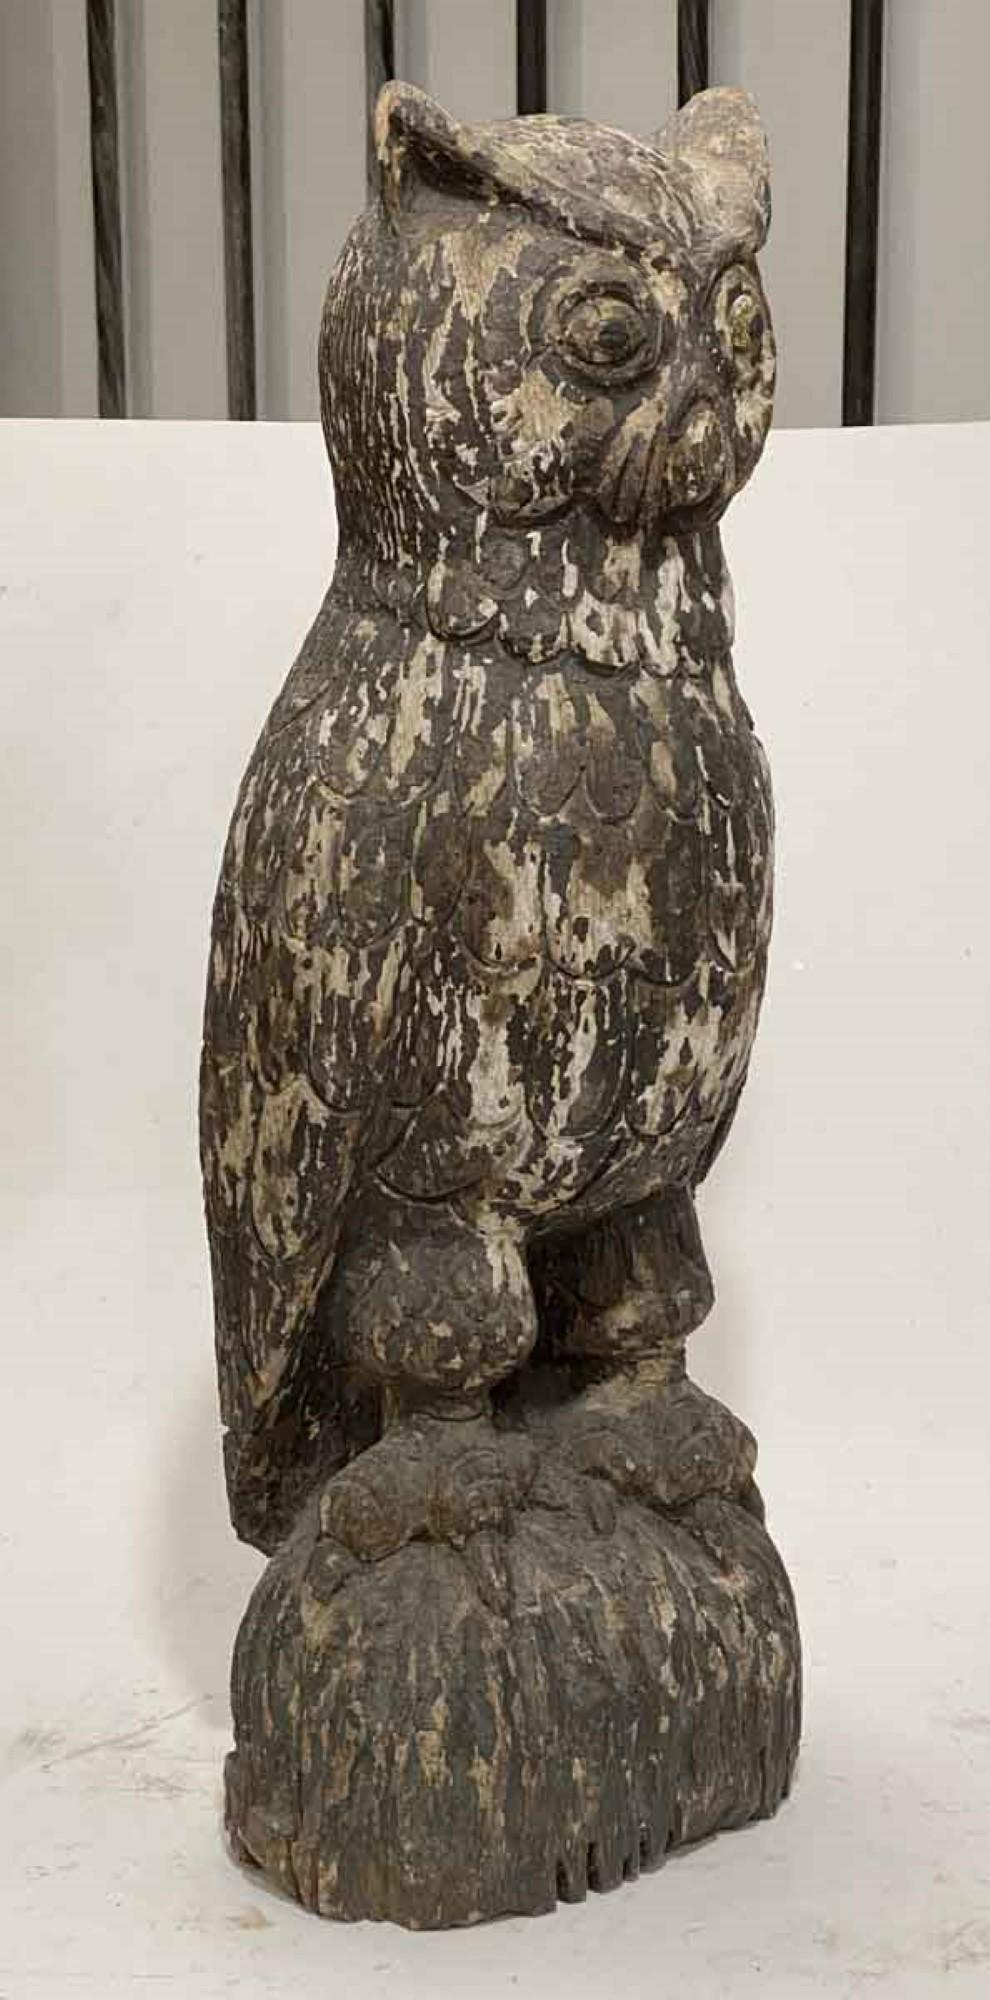 American 1940s Primitive Hand Carved Wood Owl Statue with Original Weathered Patina